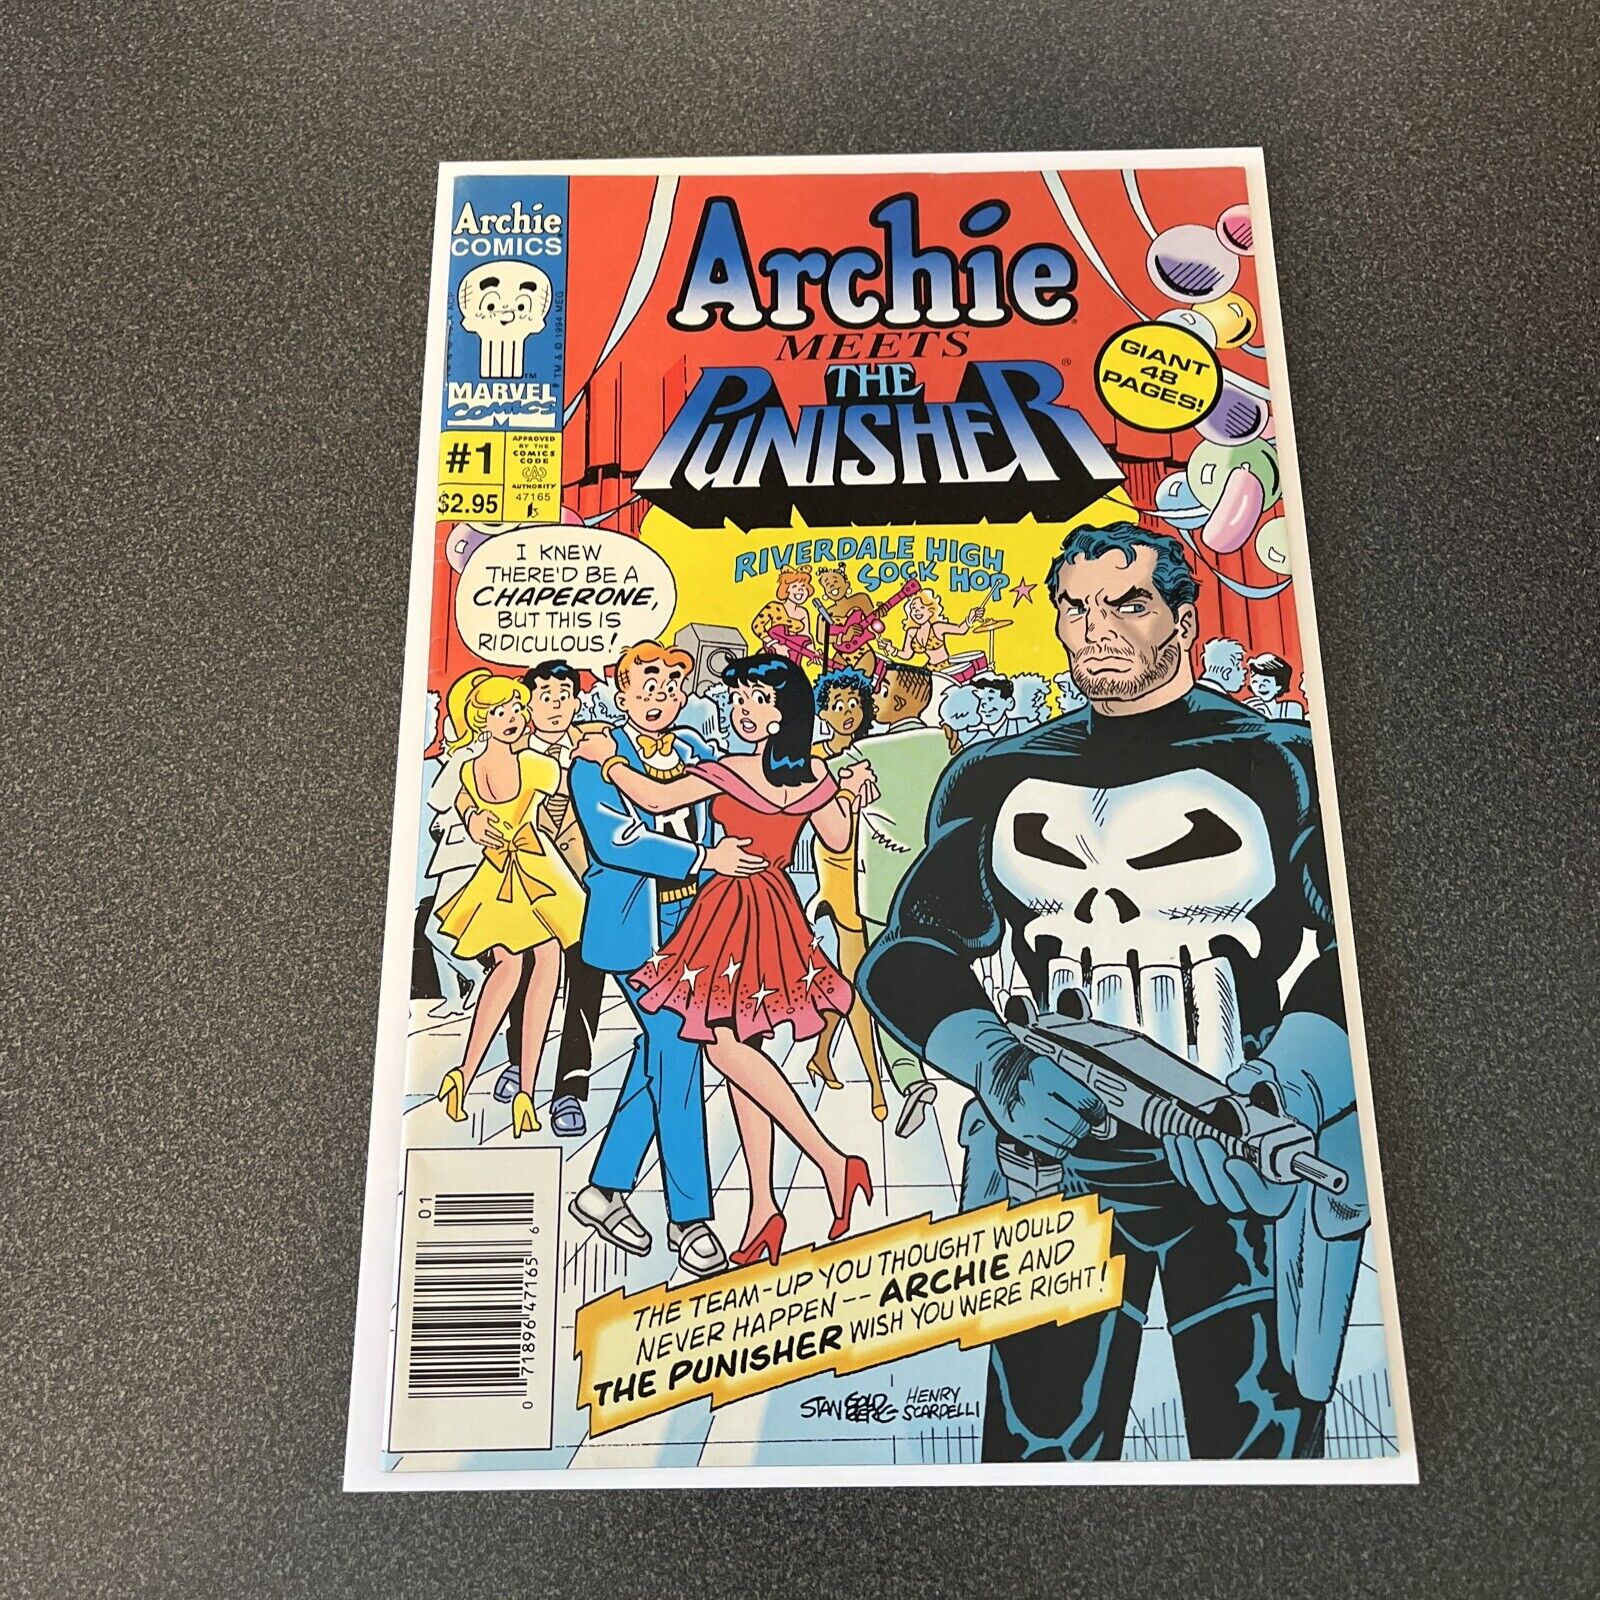 Archie Meets the Punisher #1 Newsstand Cover 1994 Archie Comics VG/FN CROSSOVER